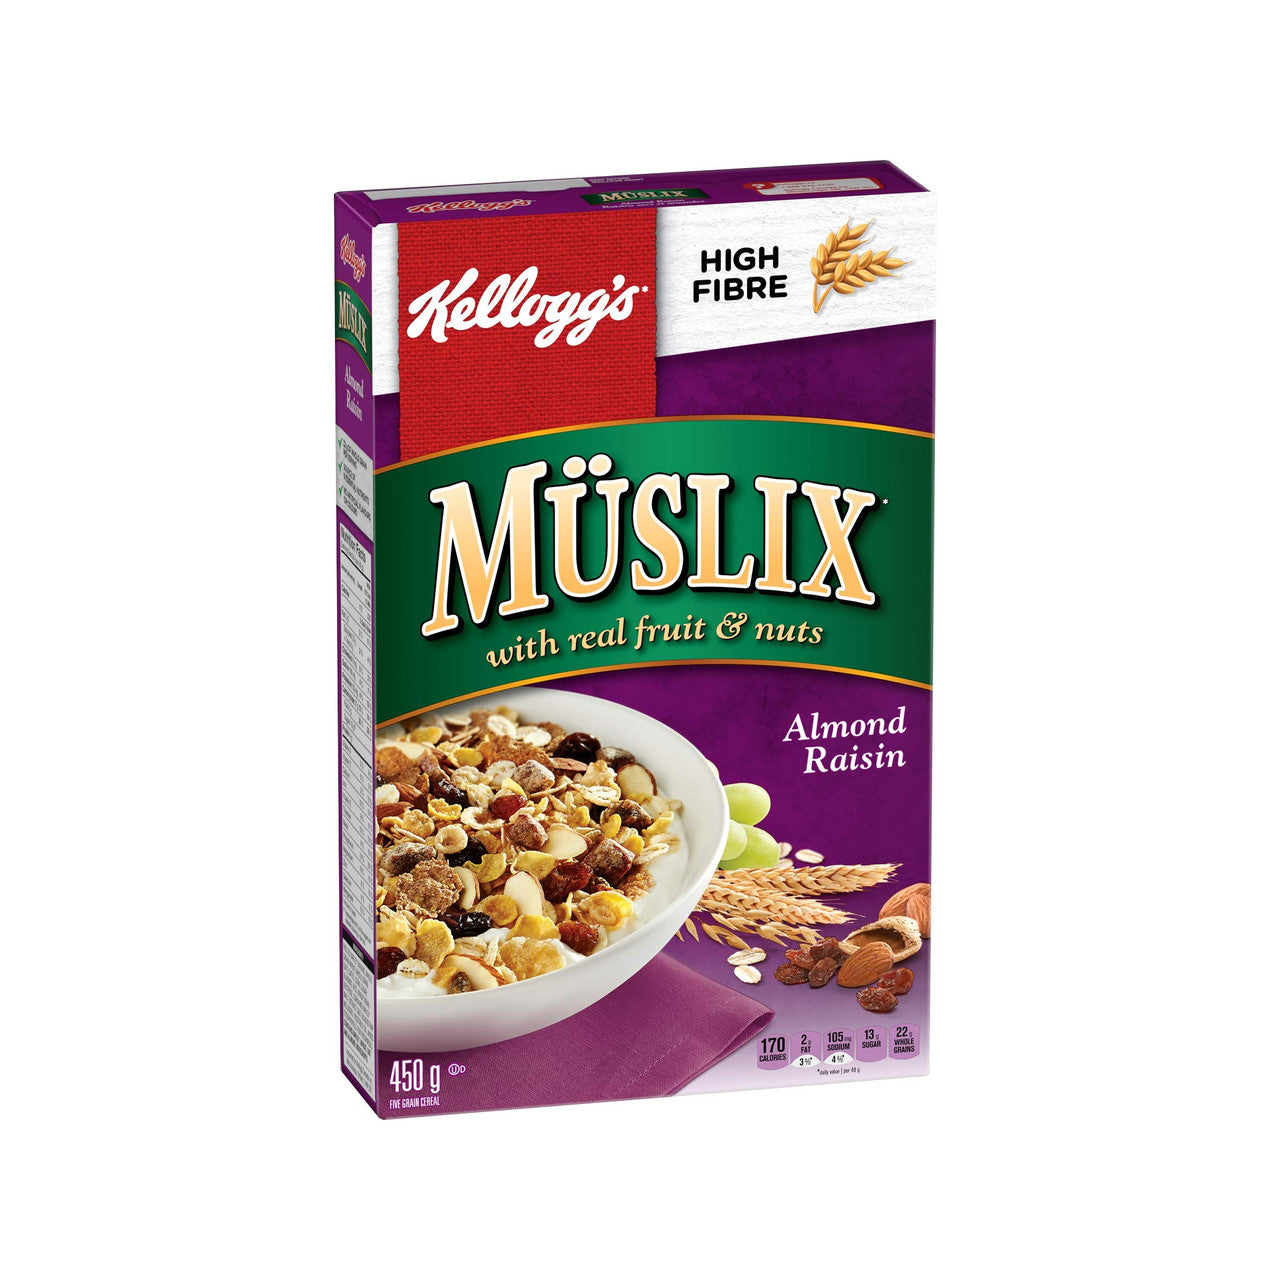 Kellogg's Muslix Almond Raisin Cereal 450g/15.9oz (Imported from Canada)